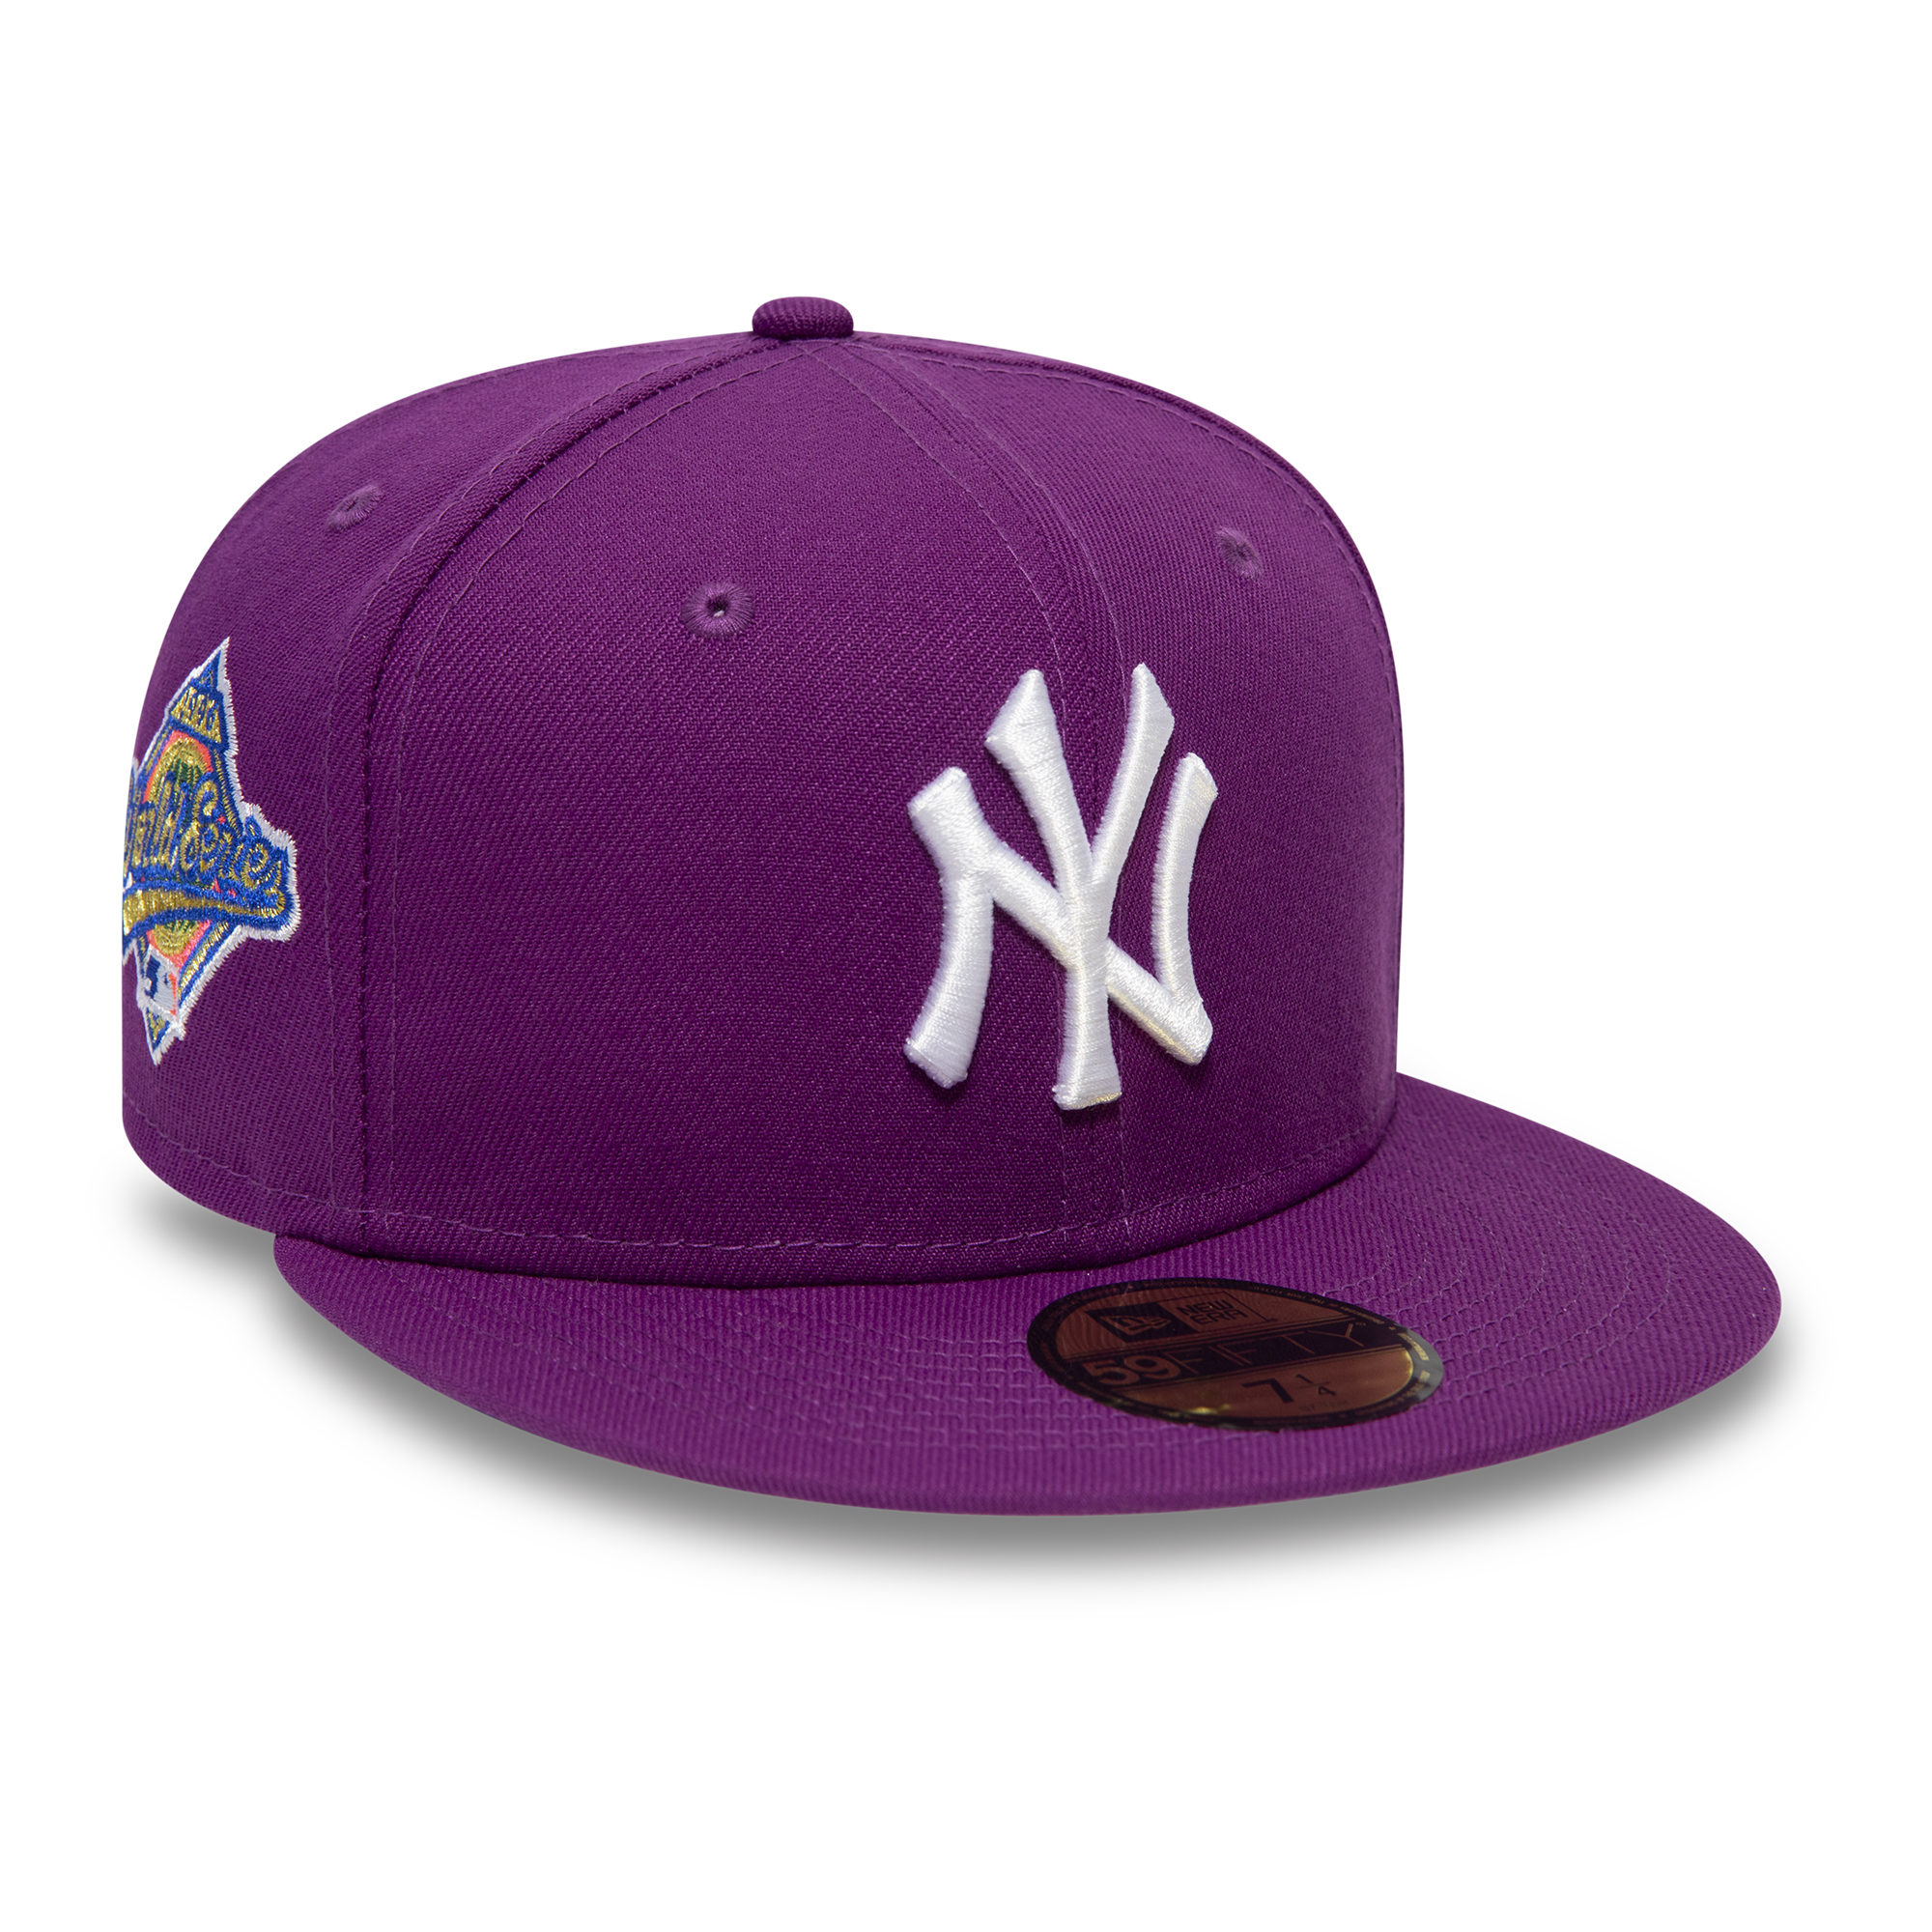 Official New Era New York Yankees MLB Sparkling Grape 59FIFTY